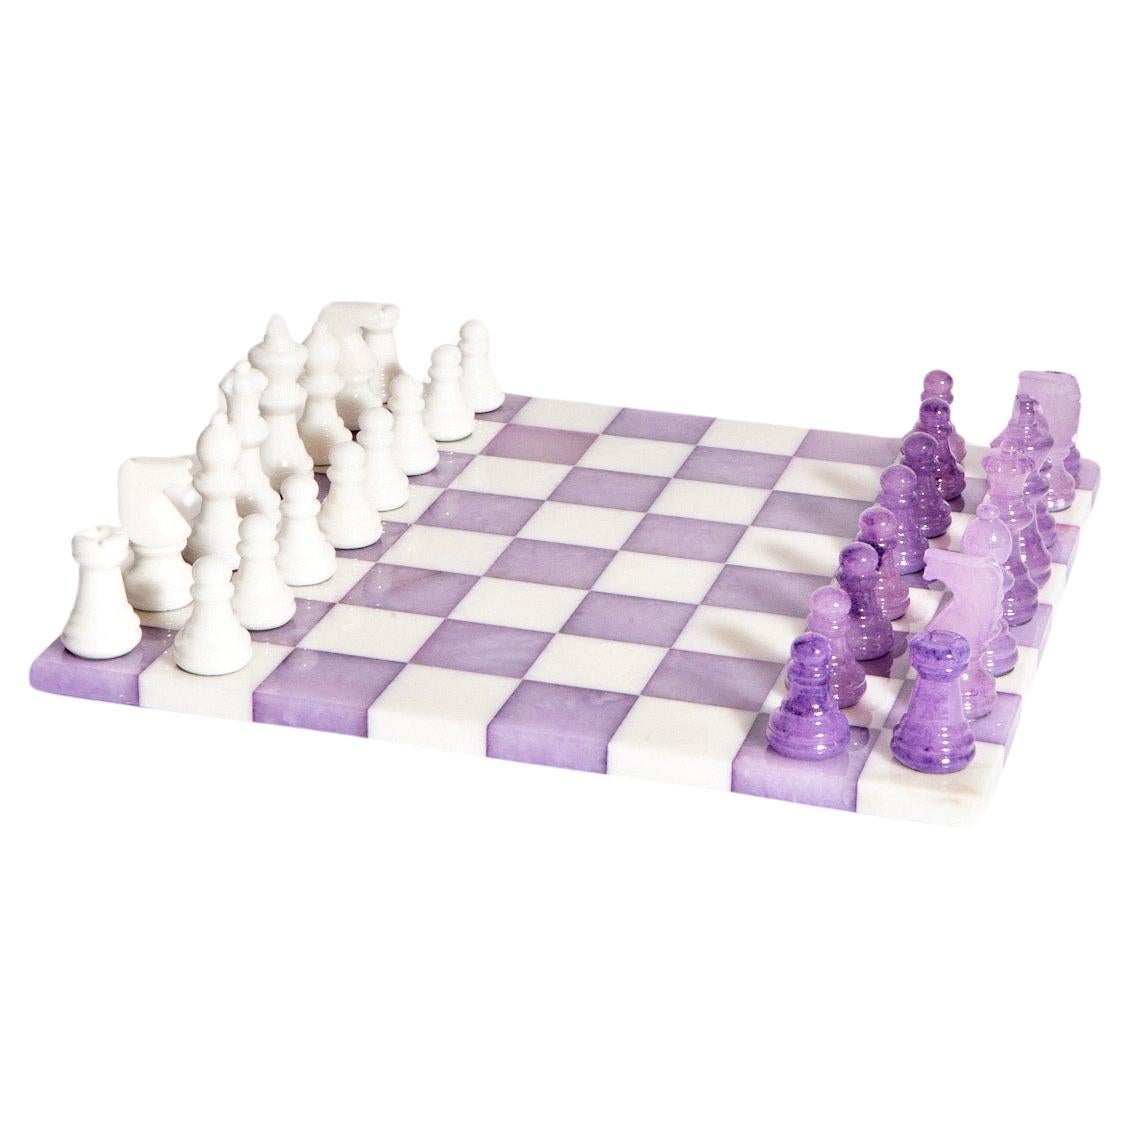 Italian Amethyst/White Large Alabaster Chess Set For Sale